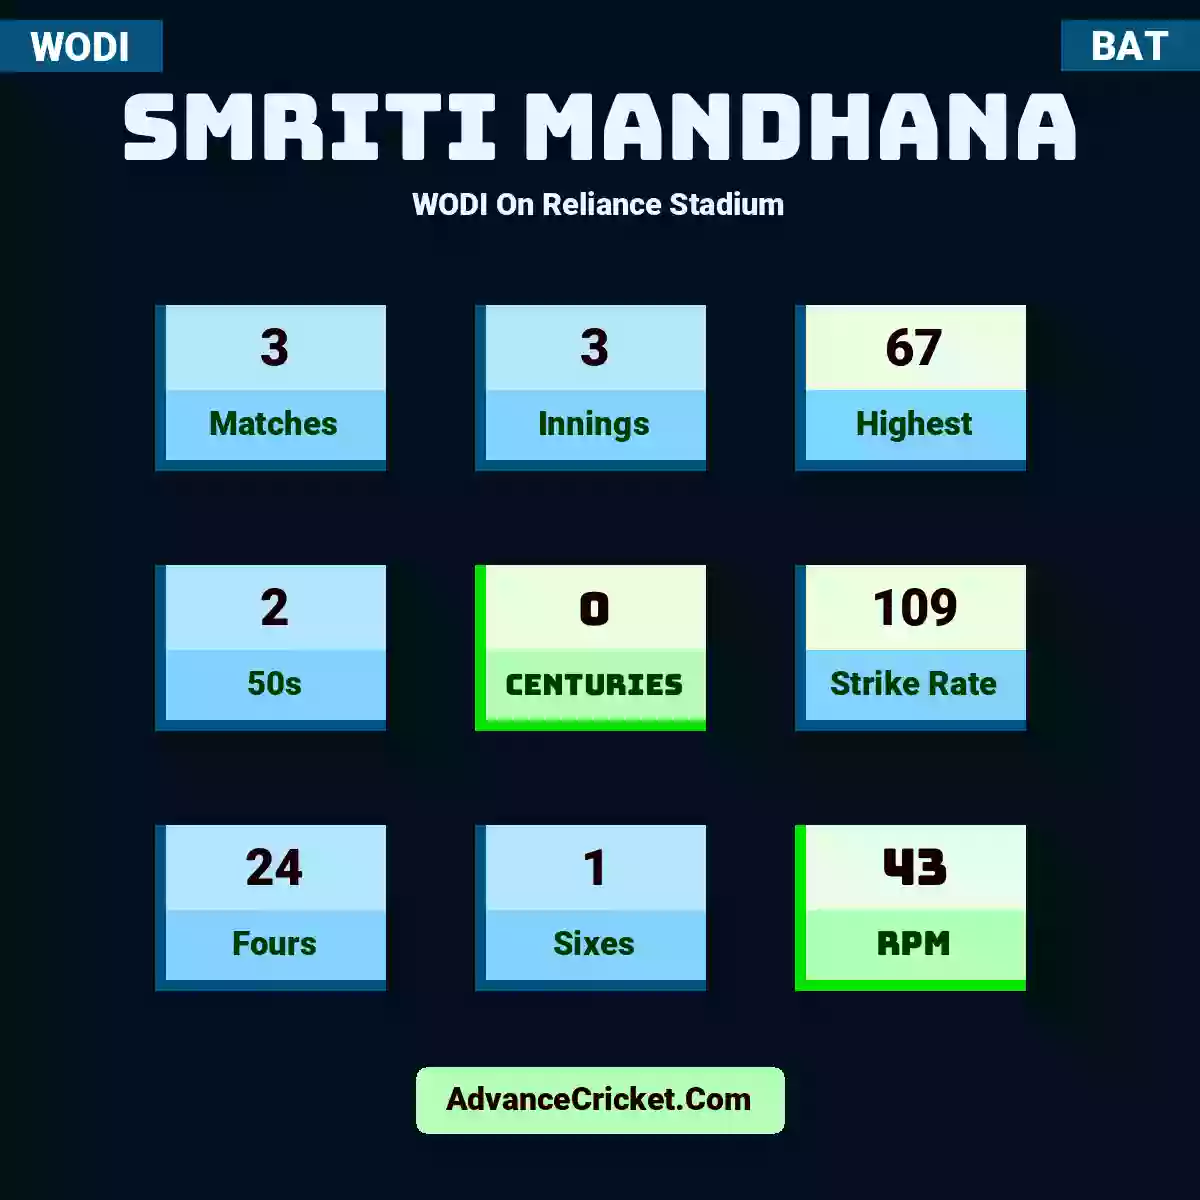 Smriti Mandhana WODI  On Reliance Stadium, Smriti Mandhana played 3 matches, scored 67 runs as highest, 2 half-centuries, and 0 centuries, with a strike rate of 109. S.Mandhana hit 24 fours and 1 sixes, with an RPM of 43.